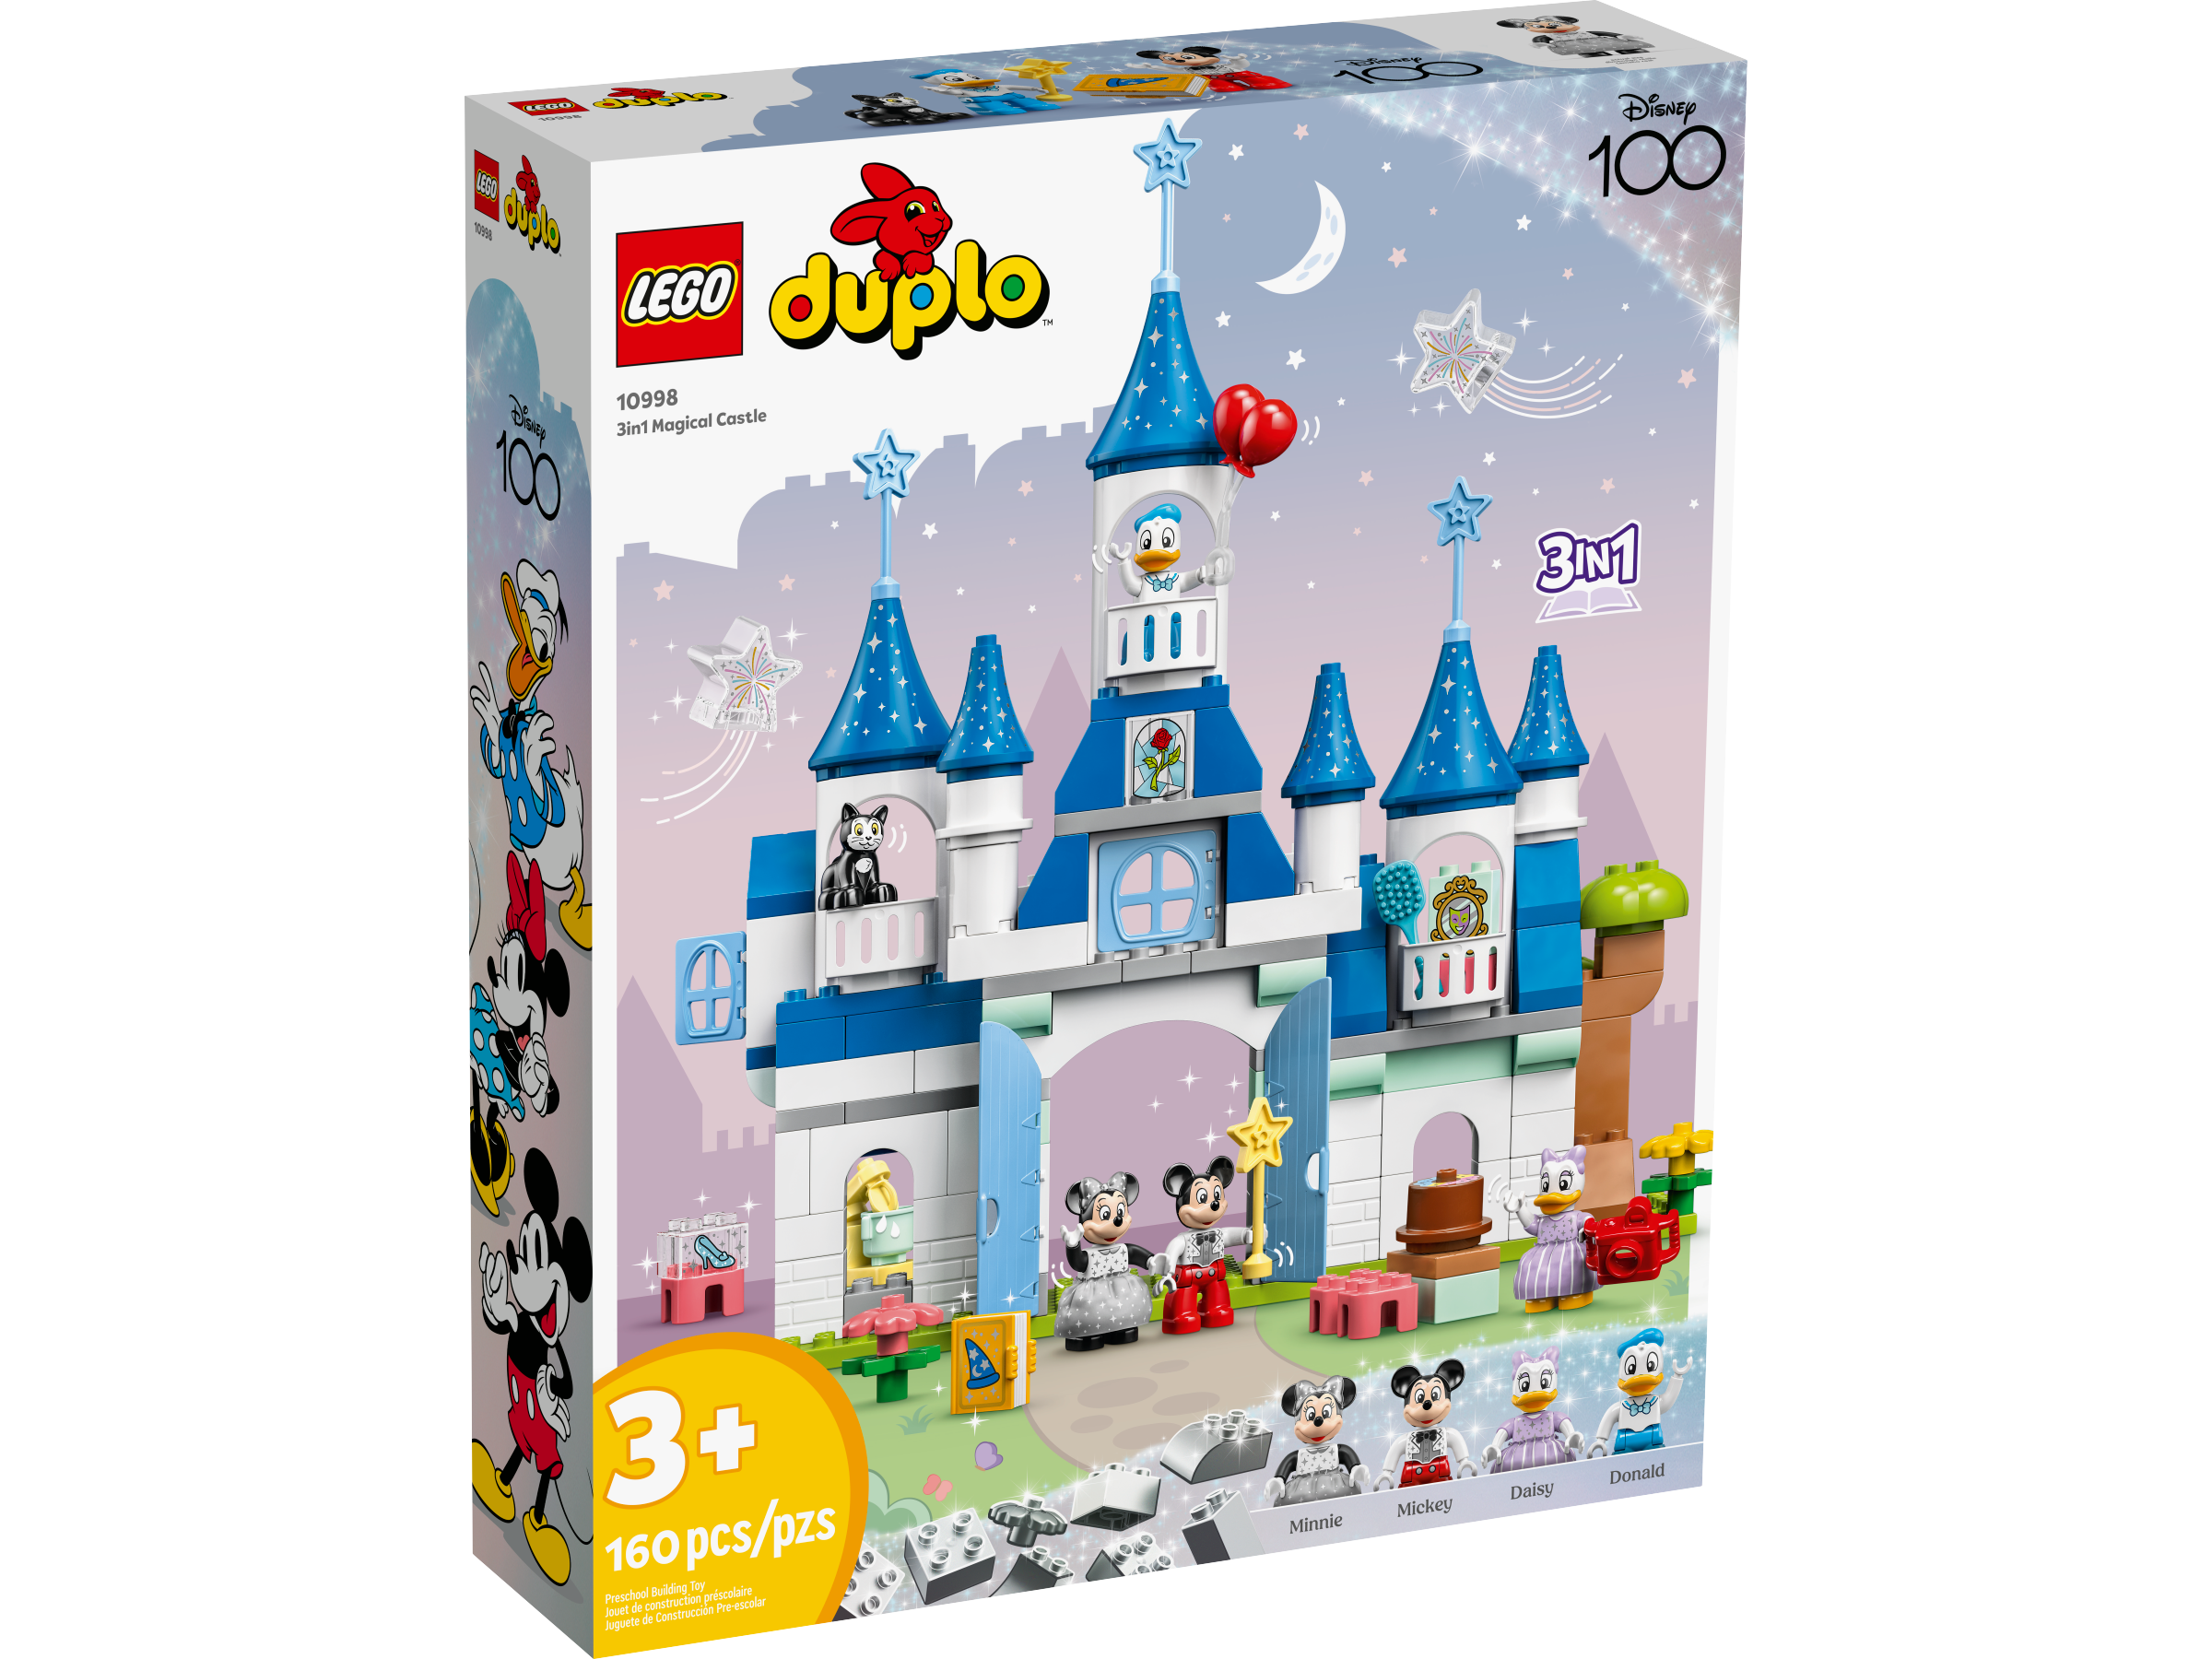 LEGO Duplo Creative Fun Building Kit, 120 Pieces, Ages 18mo.+ – Dragonfly  Castle